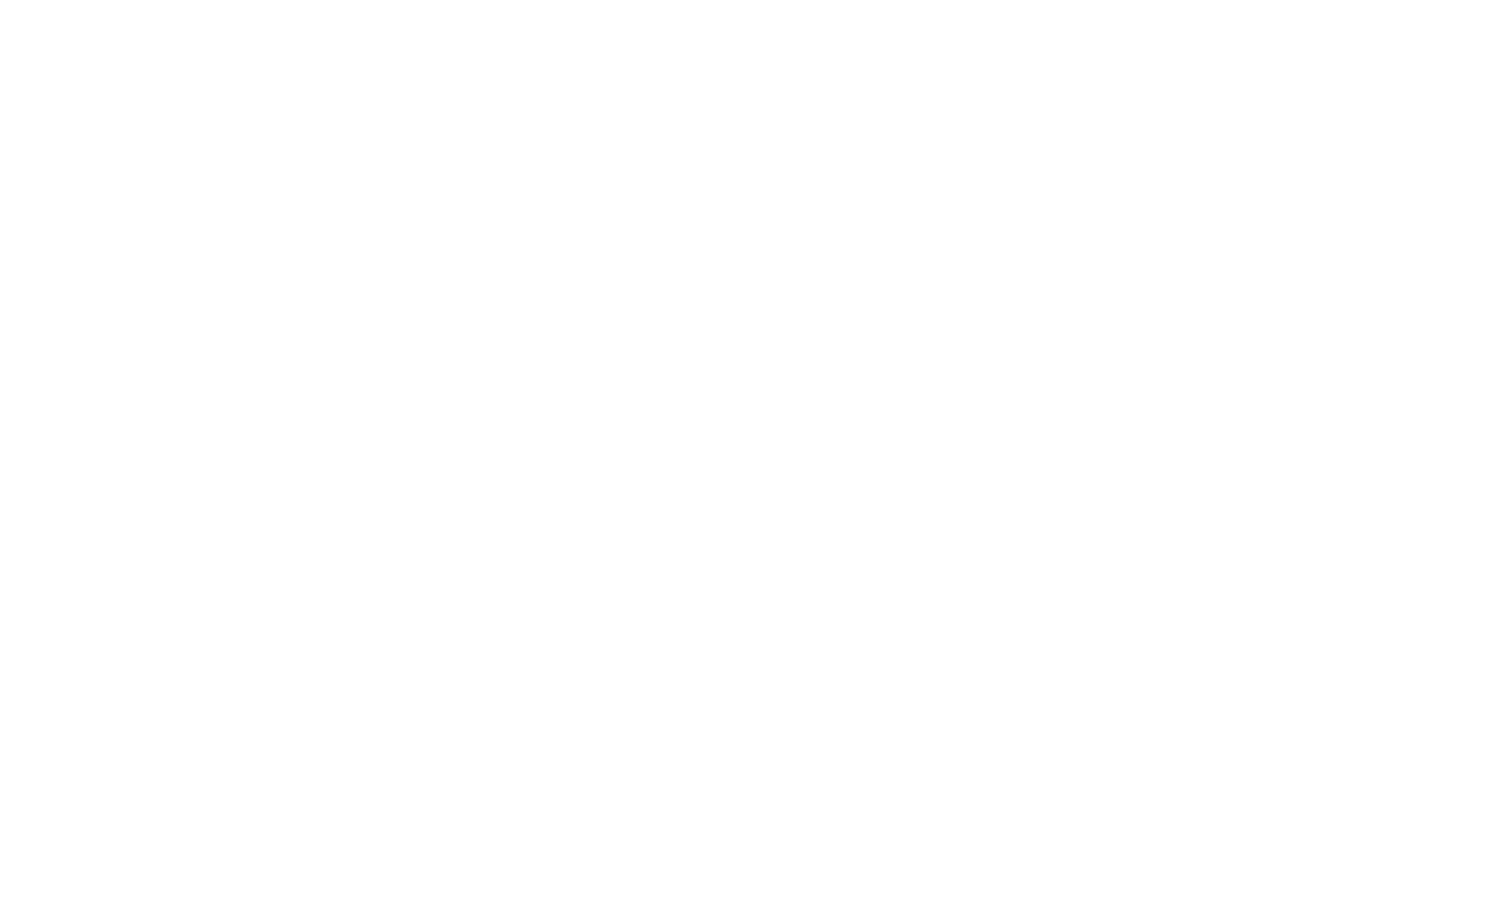 Tapered End Mills &mdash; Award Cutter Company, Inc.